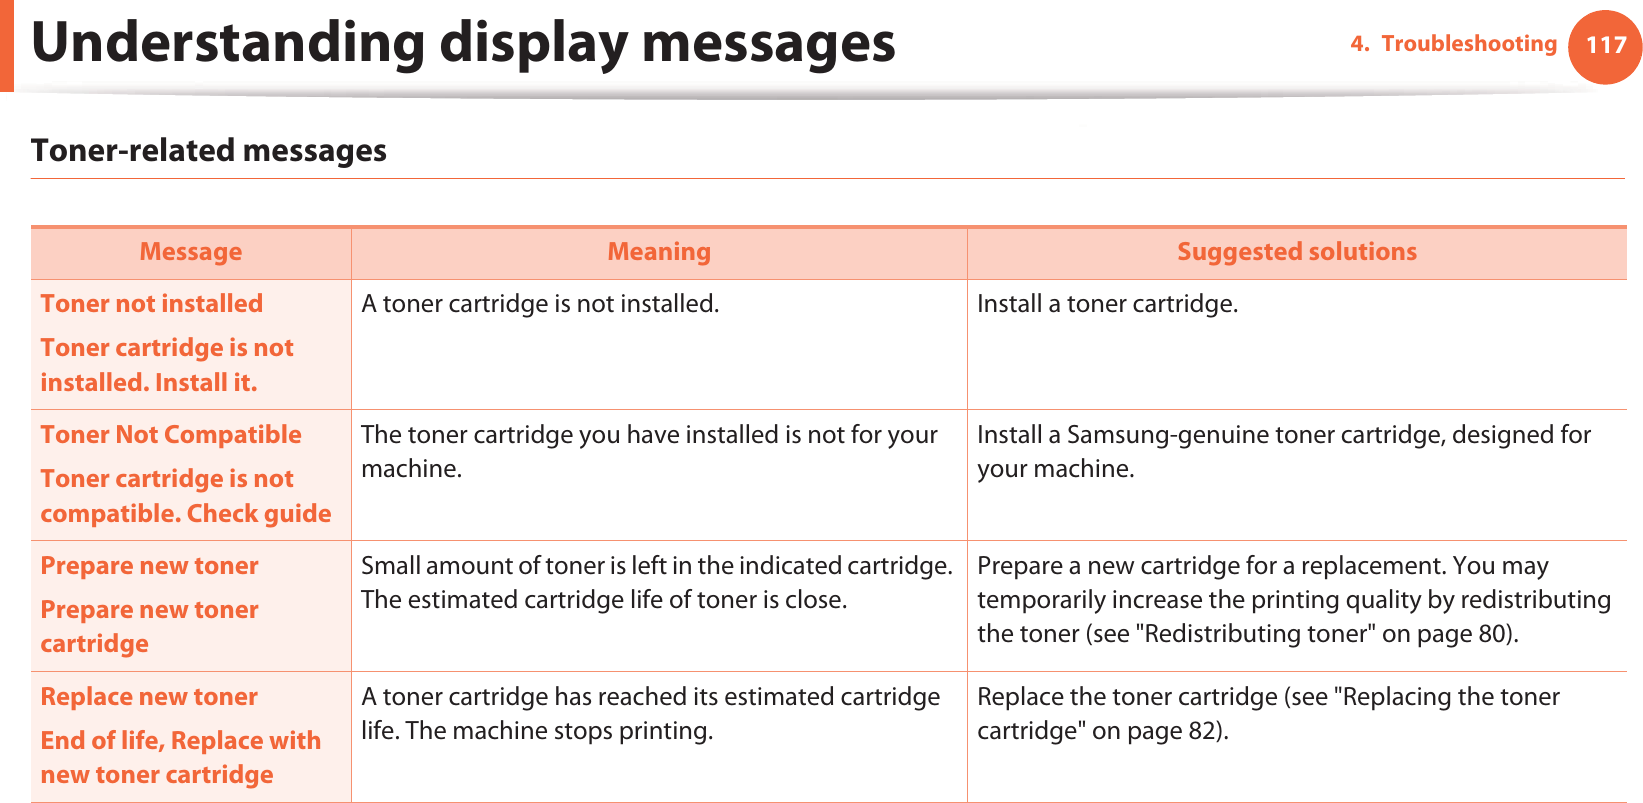 Understanding display messages 1174. TroubleshootingToner-related messages Message Meaning Suggested solutionsToner not installedToner cartridge is not installed. Install it.A toner cartridge is not installed. Install a toner cartridge.Toner Not CompatibleToner cartridge is not compatible. Check guideThe toner cartridge you have installed is not for your machine.Install a Samsung-genuine toner cartridge, designed for your machine.Prepare new tonerPrepare new toner cartridgeSmall amount of toner is left in the indicated cartridge. The estimated cartridge life of toner is close.Prepare a new cartridge for a replacement. You may temporarily increase the printing quality by redistributing the toner (see &quot;Redistributing toner&quot; on page 80).Replace new tonerEnd of life, Replace with new toner cartridgeA toner cartridge has reached its estimated cartridge life. The machine stops printing.Replace the toner cartridge (see &quot;Replacing the toner cartridge&quot; on page 82).